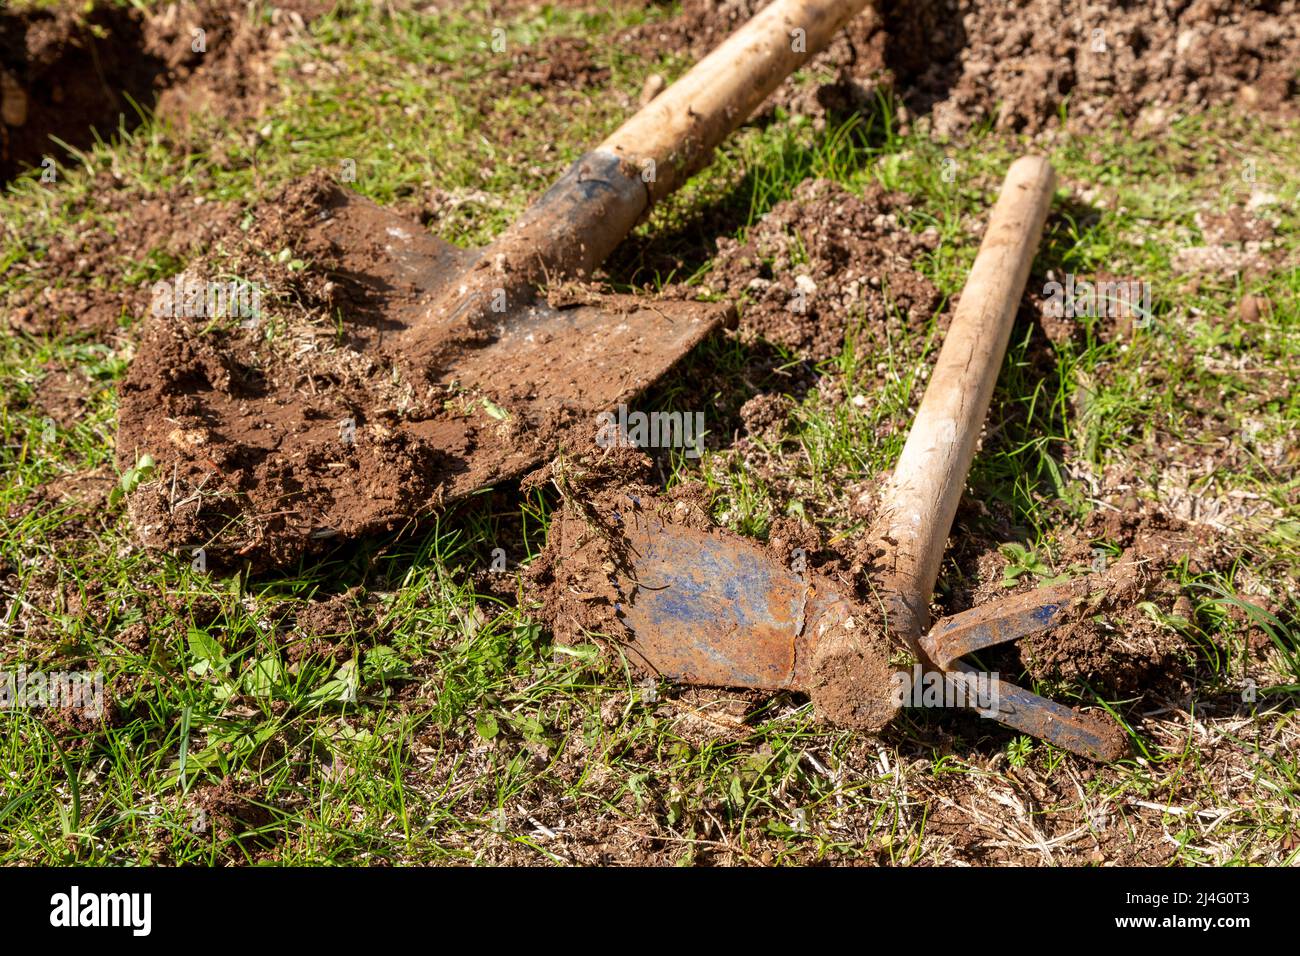 Used farming shovel and hoe with soil on it. Agricultural hoe in selective focus. Gardening, spring, agriculture concept. Stock Photo